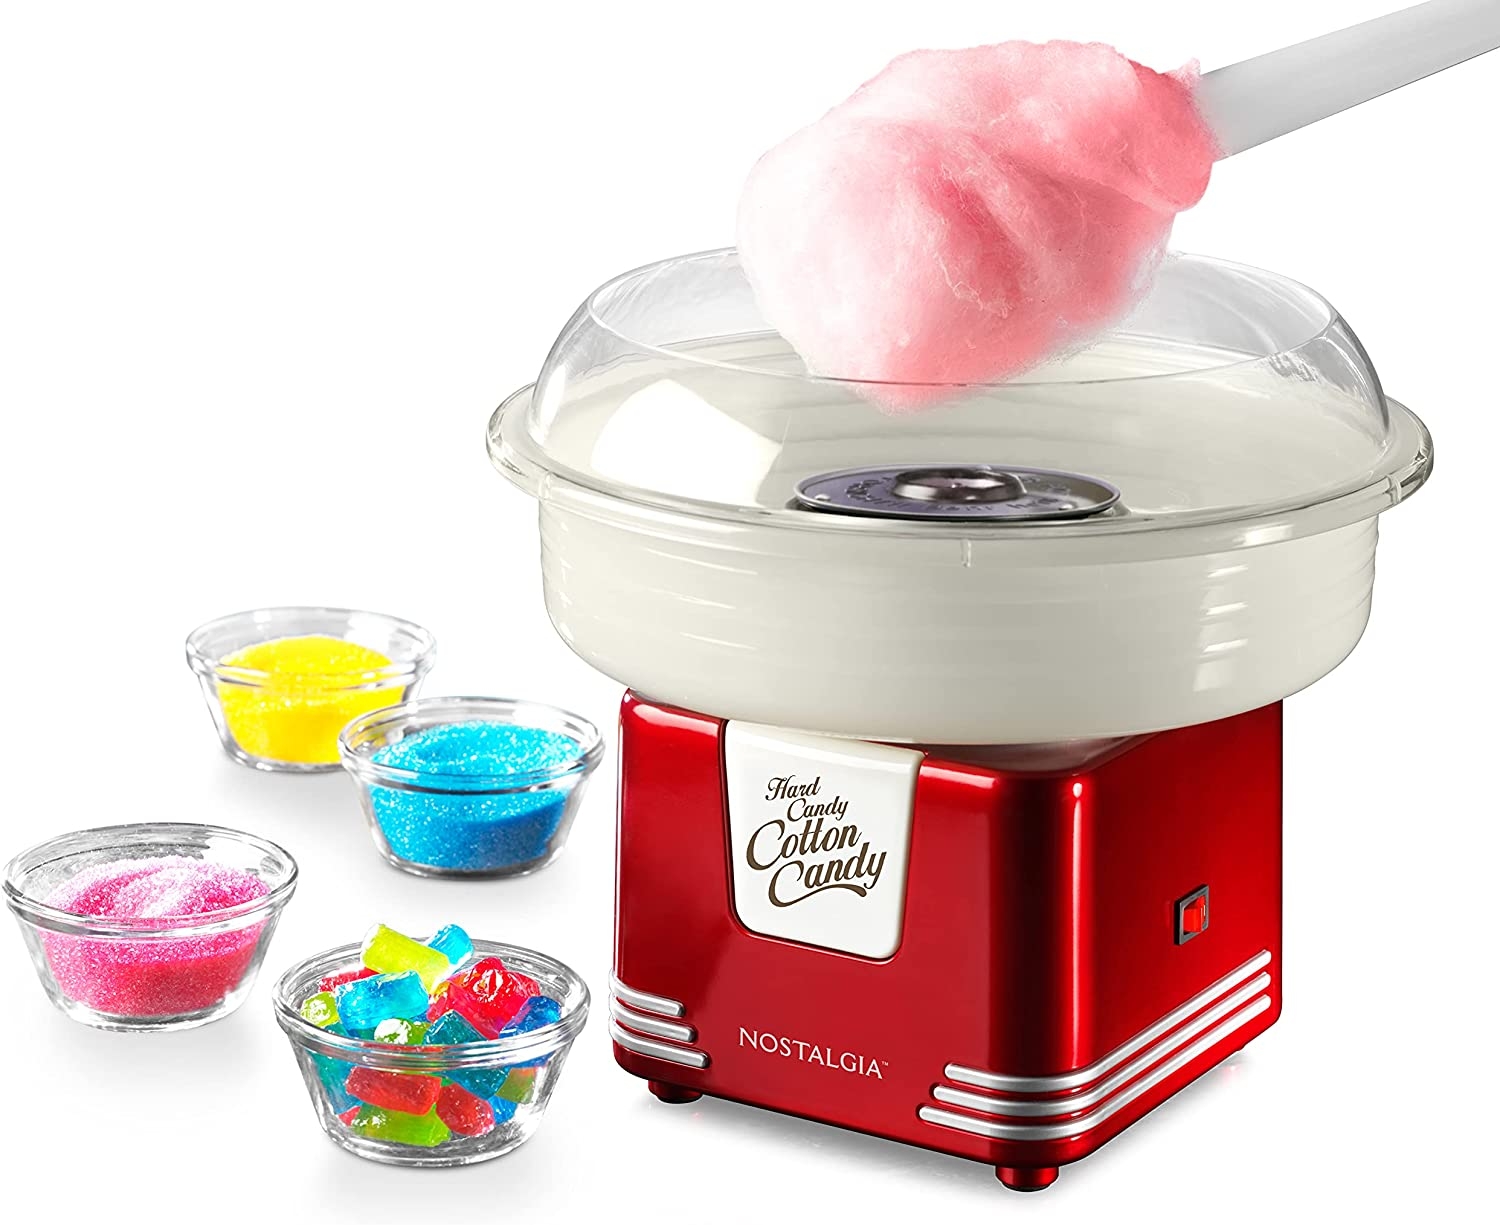 Nostalgia Retro Hard and Sugar Free Countertop Original Cotton Candy Maker, Includes 2 Reusable Cones and Scoop – Red Import